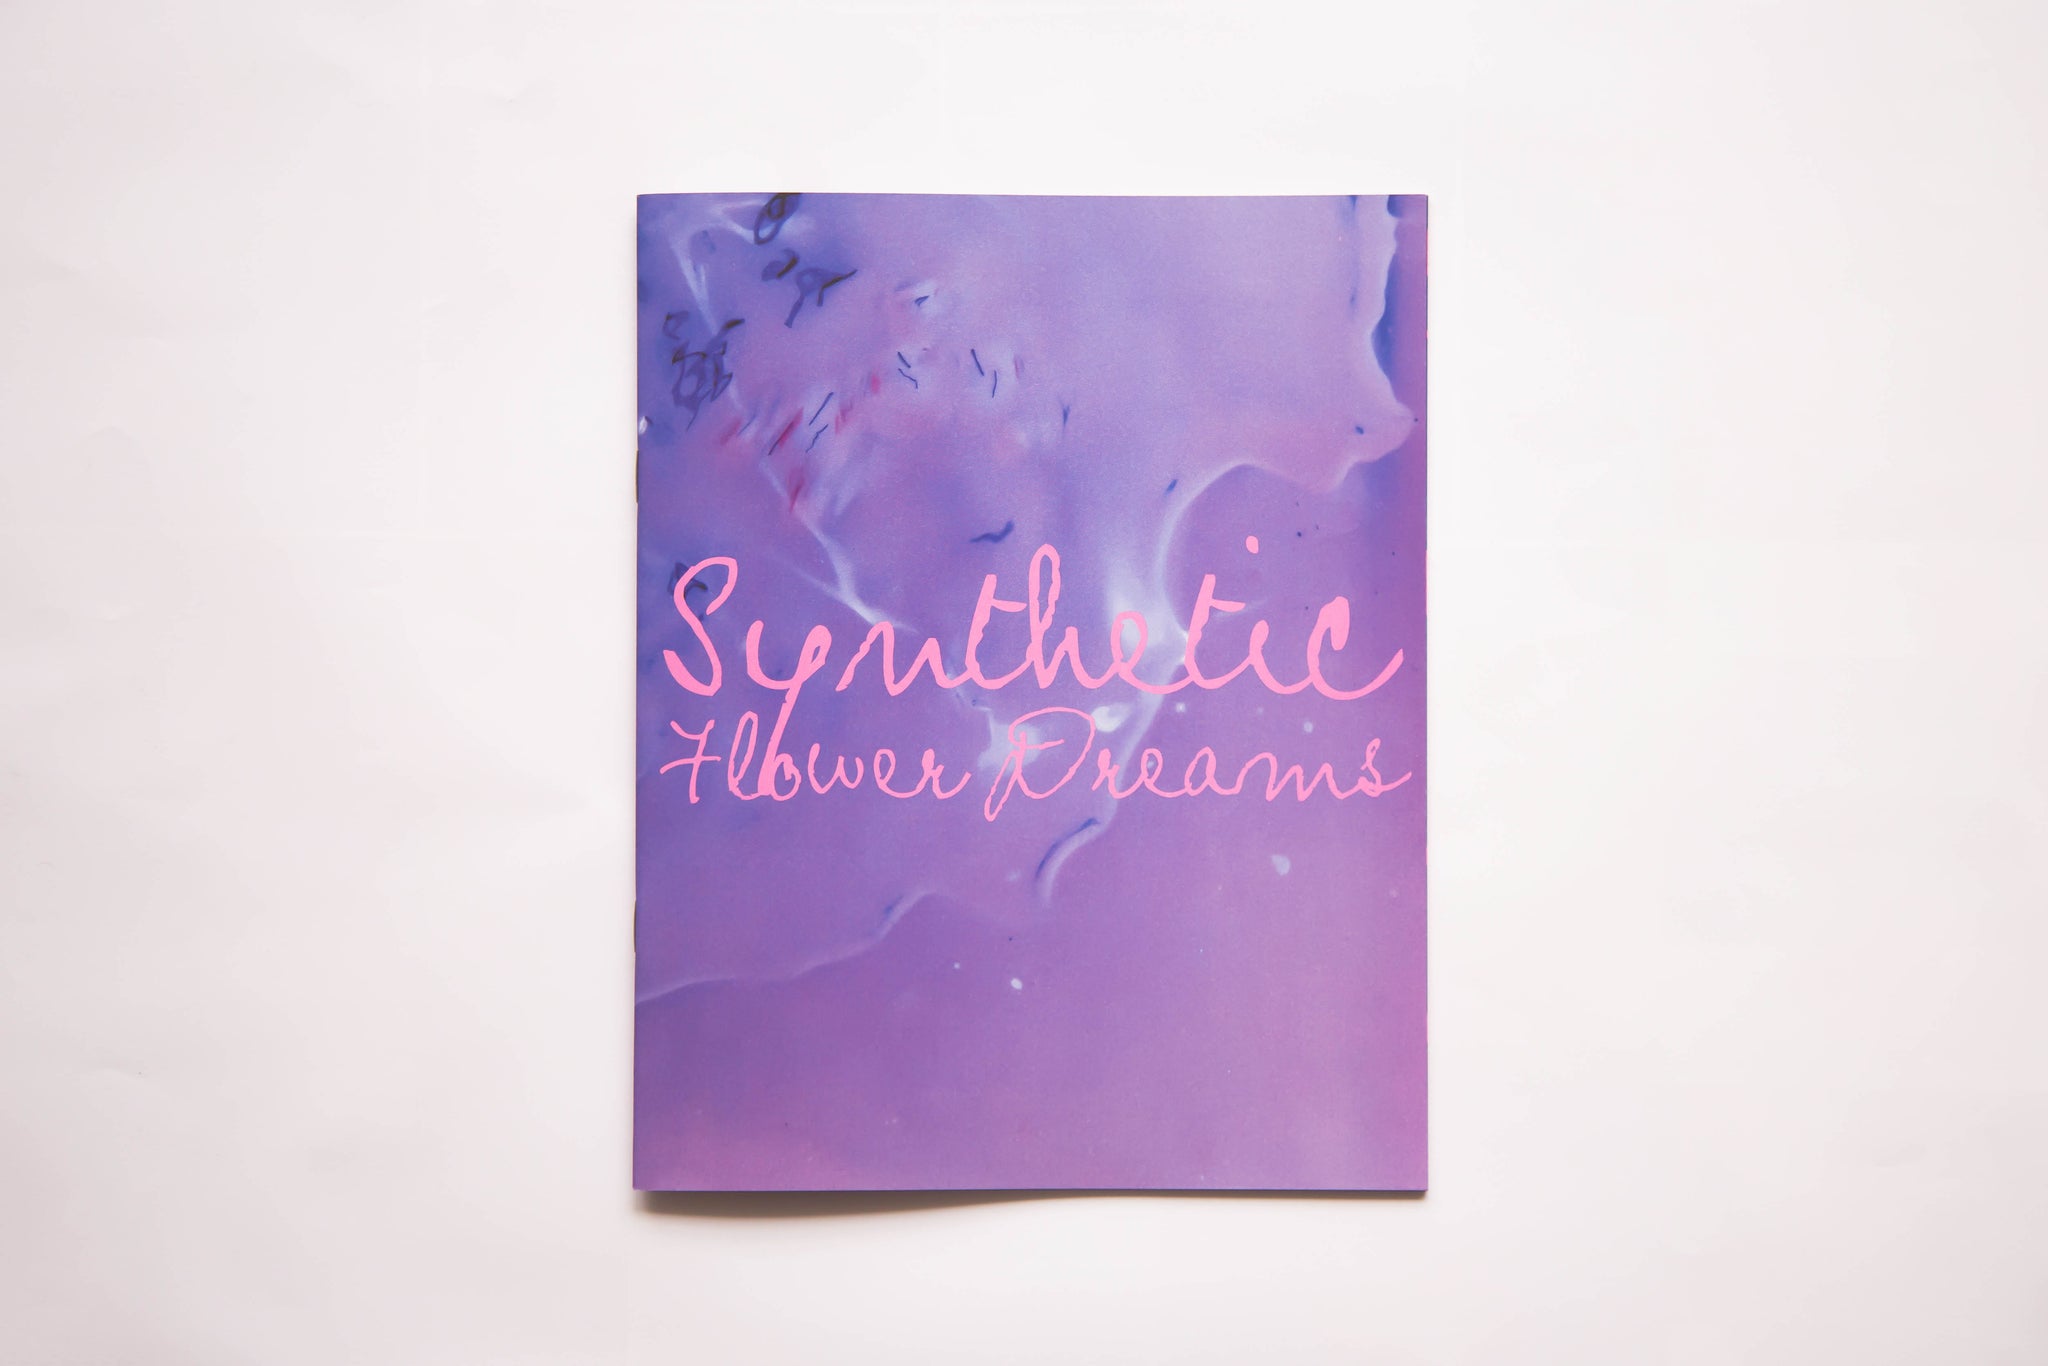 Synthetic Flower Dreams Zine by Eeshani Mitra